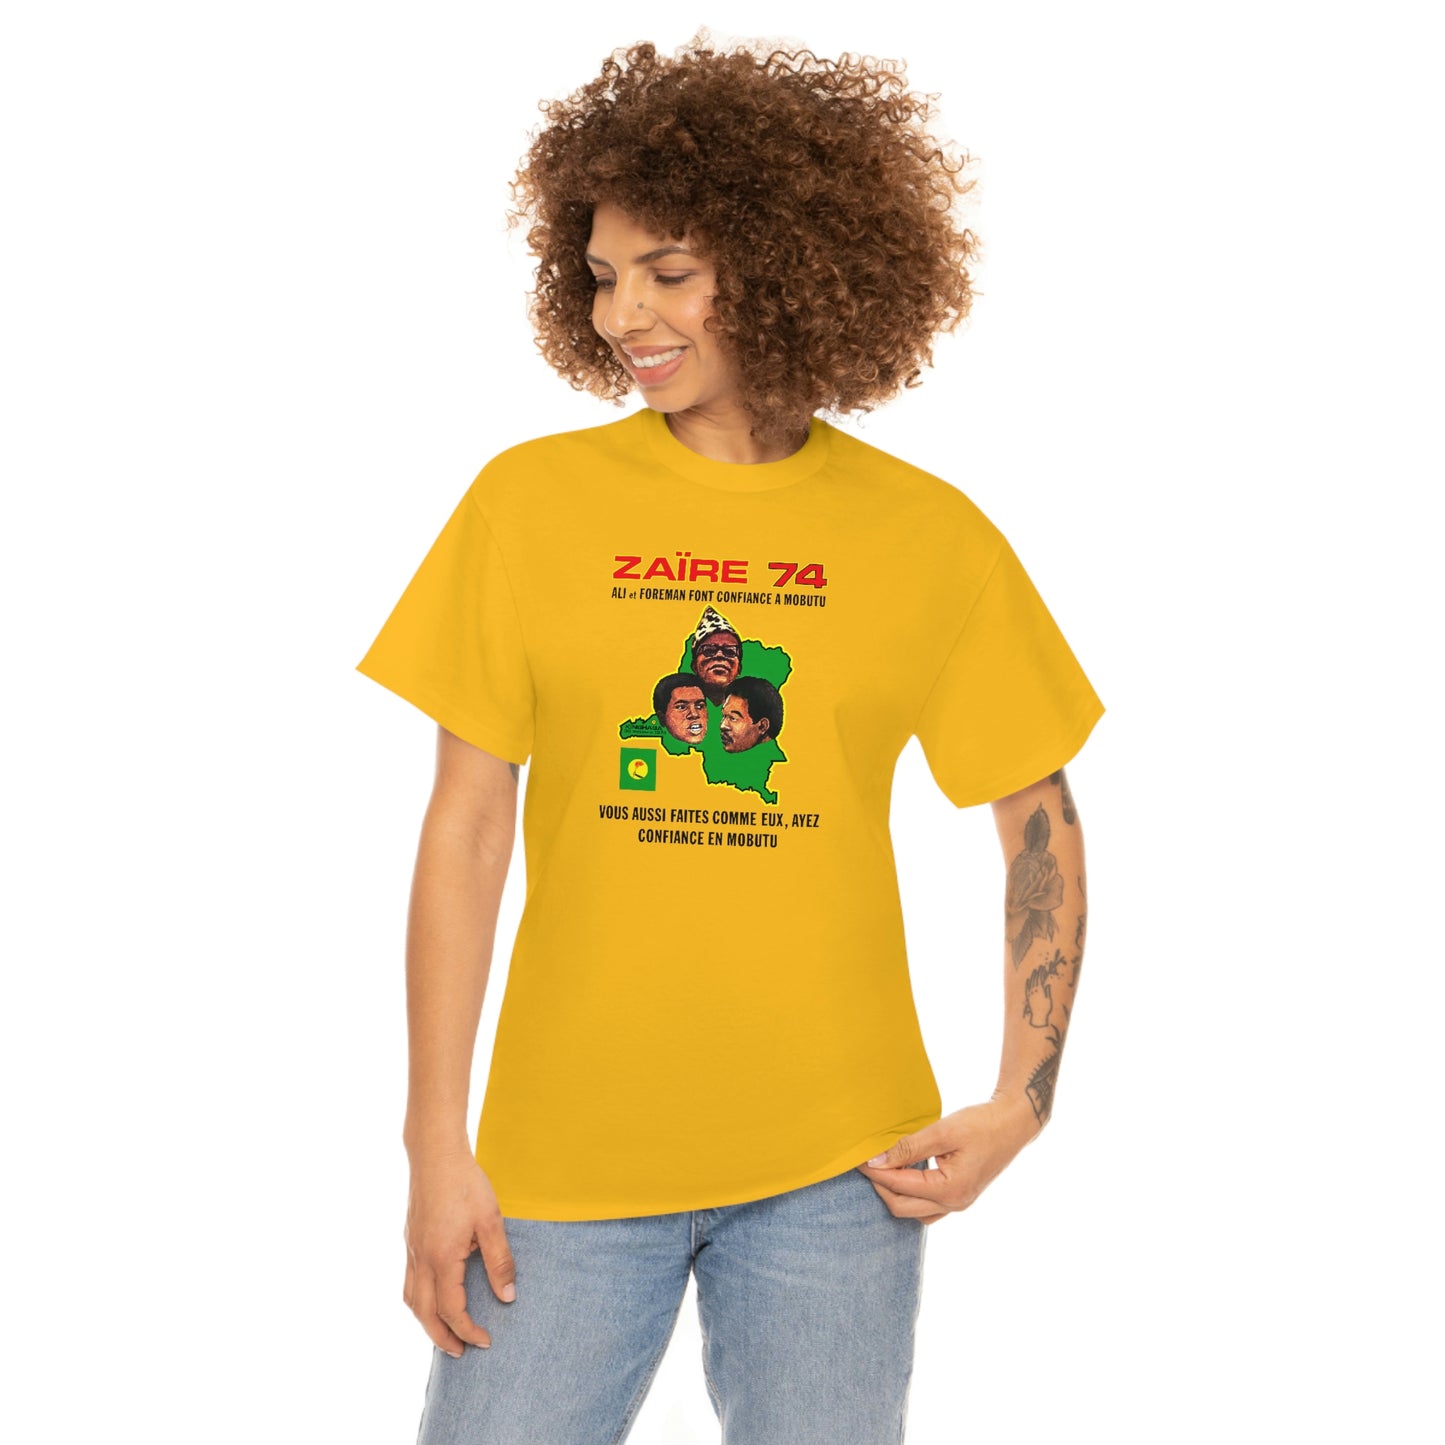 Rumble in the Jungle T-Shirt